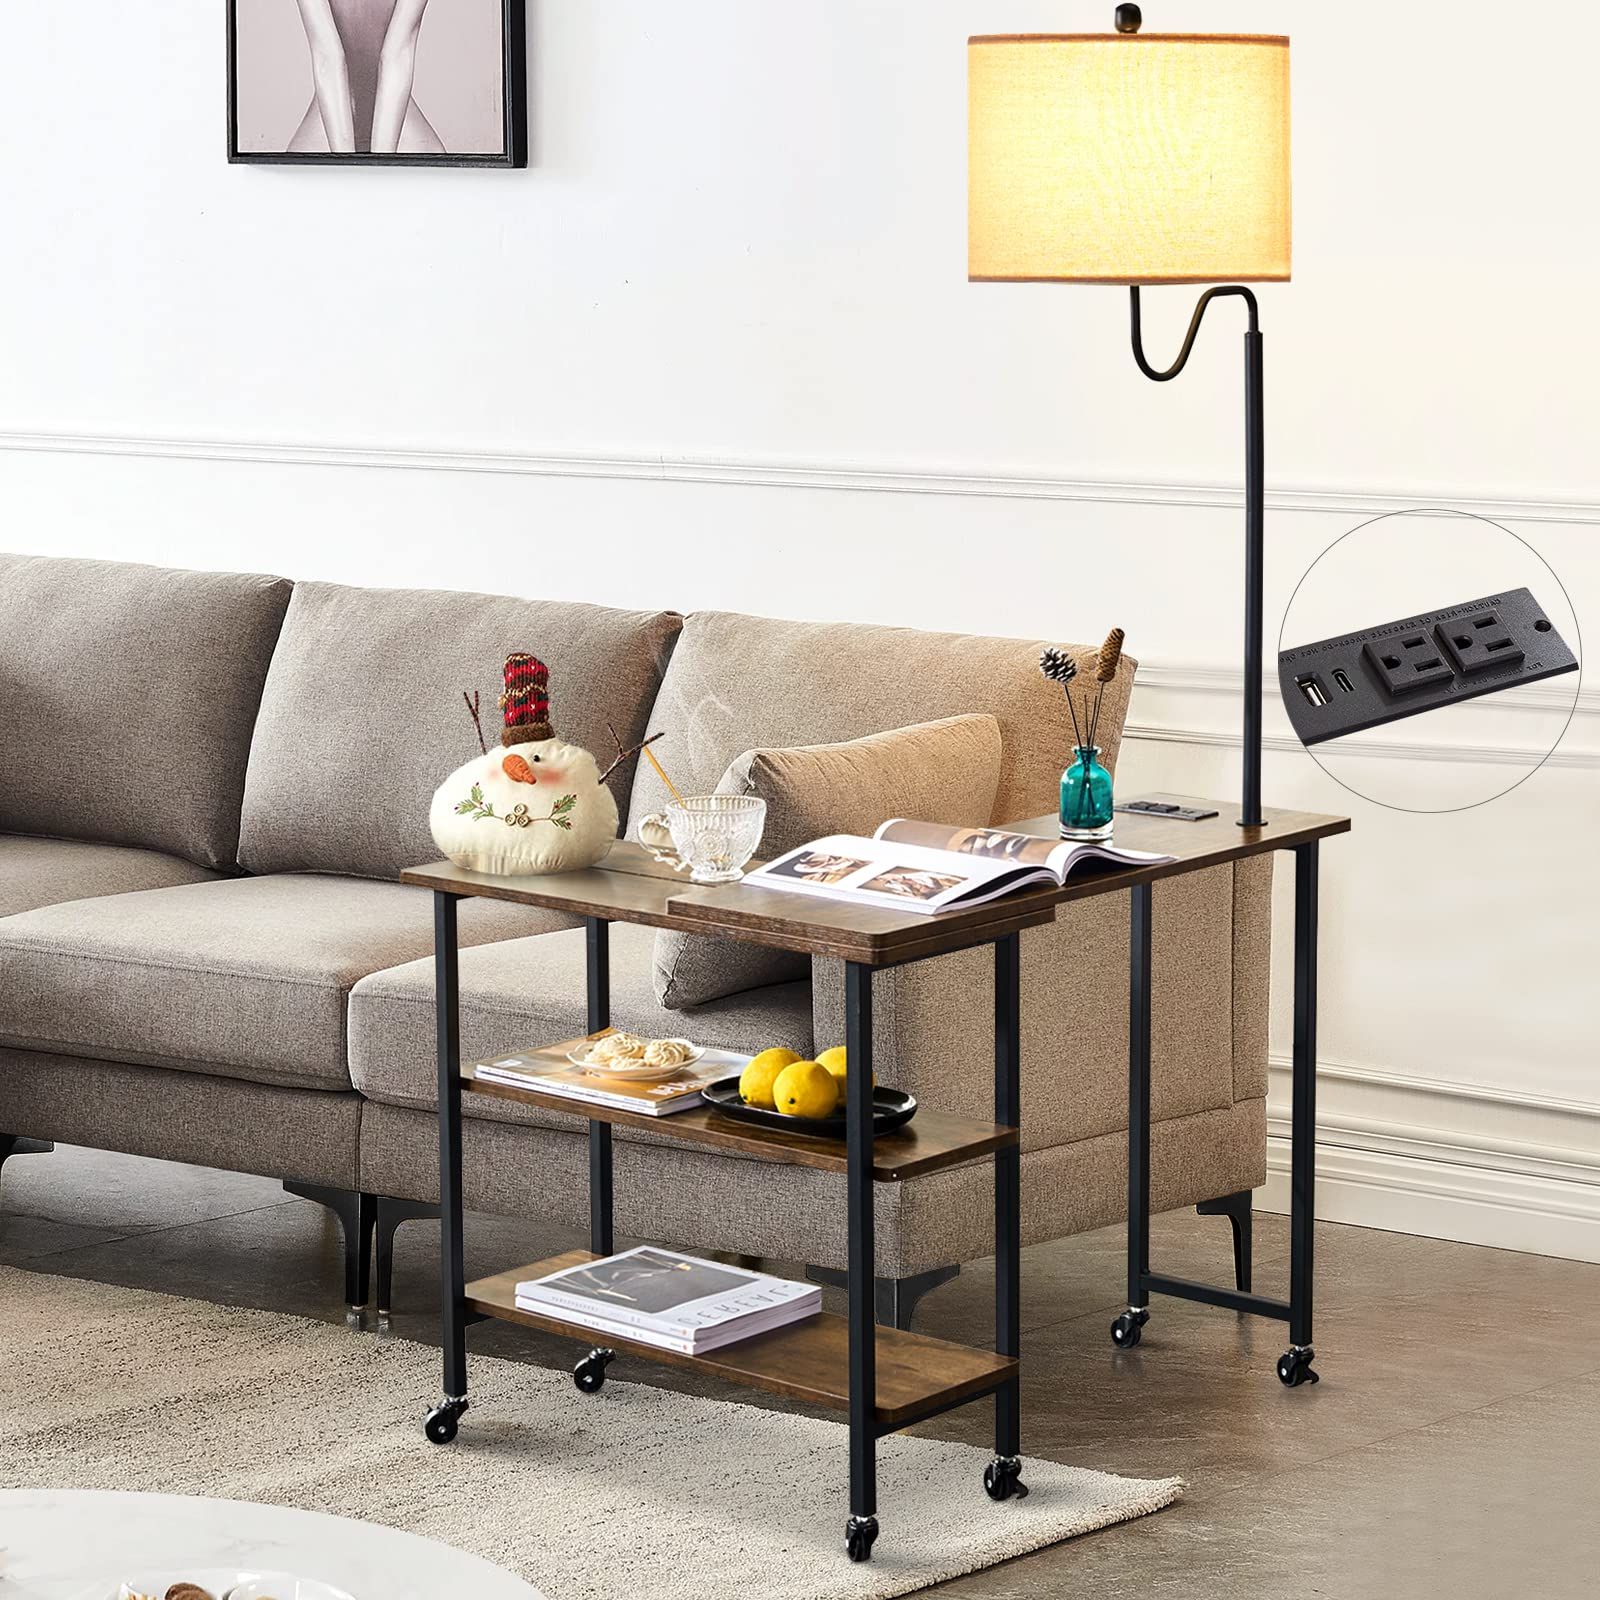 Most Up To Date Standing Lamps With 2 Tier Table Pertaining To Amazon: Lokhom Floor Lamp With Table, 360°rotatable Sofa Side Table  With Lamp,  (View 5 of 15)